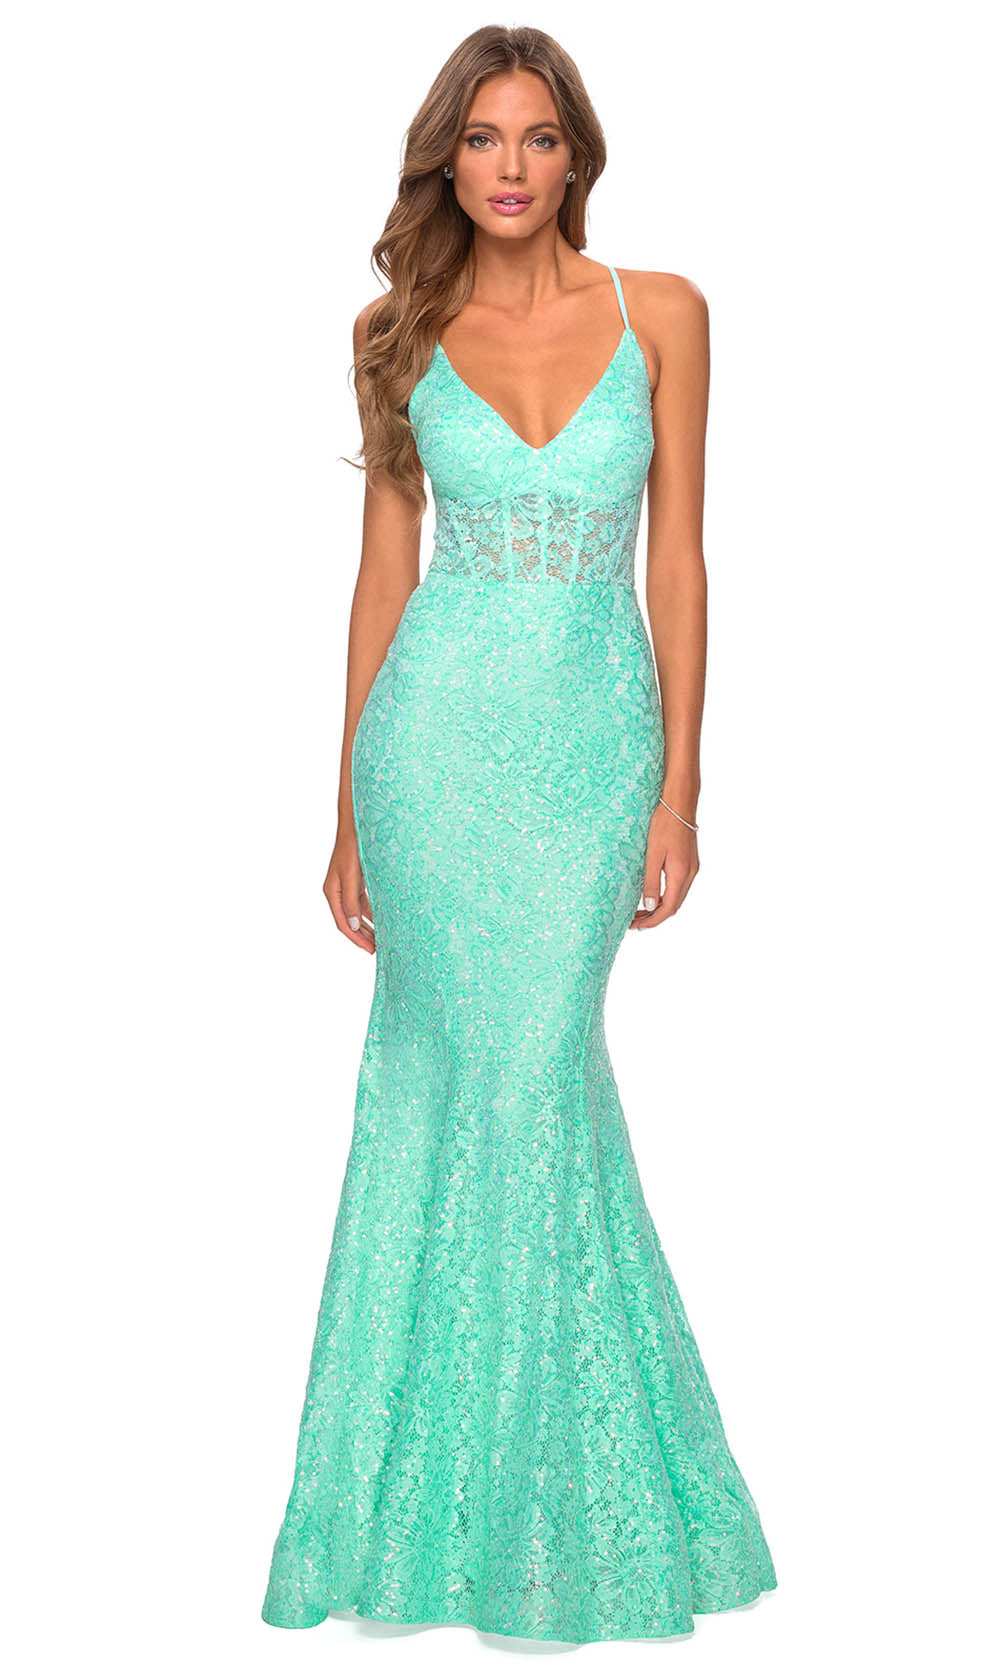 La Femme - 28647 Plunging V-Neck Sequin Lace Mermaid Gown In Green